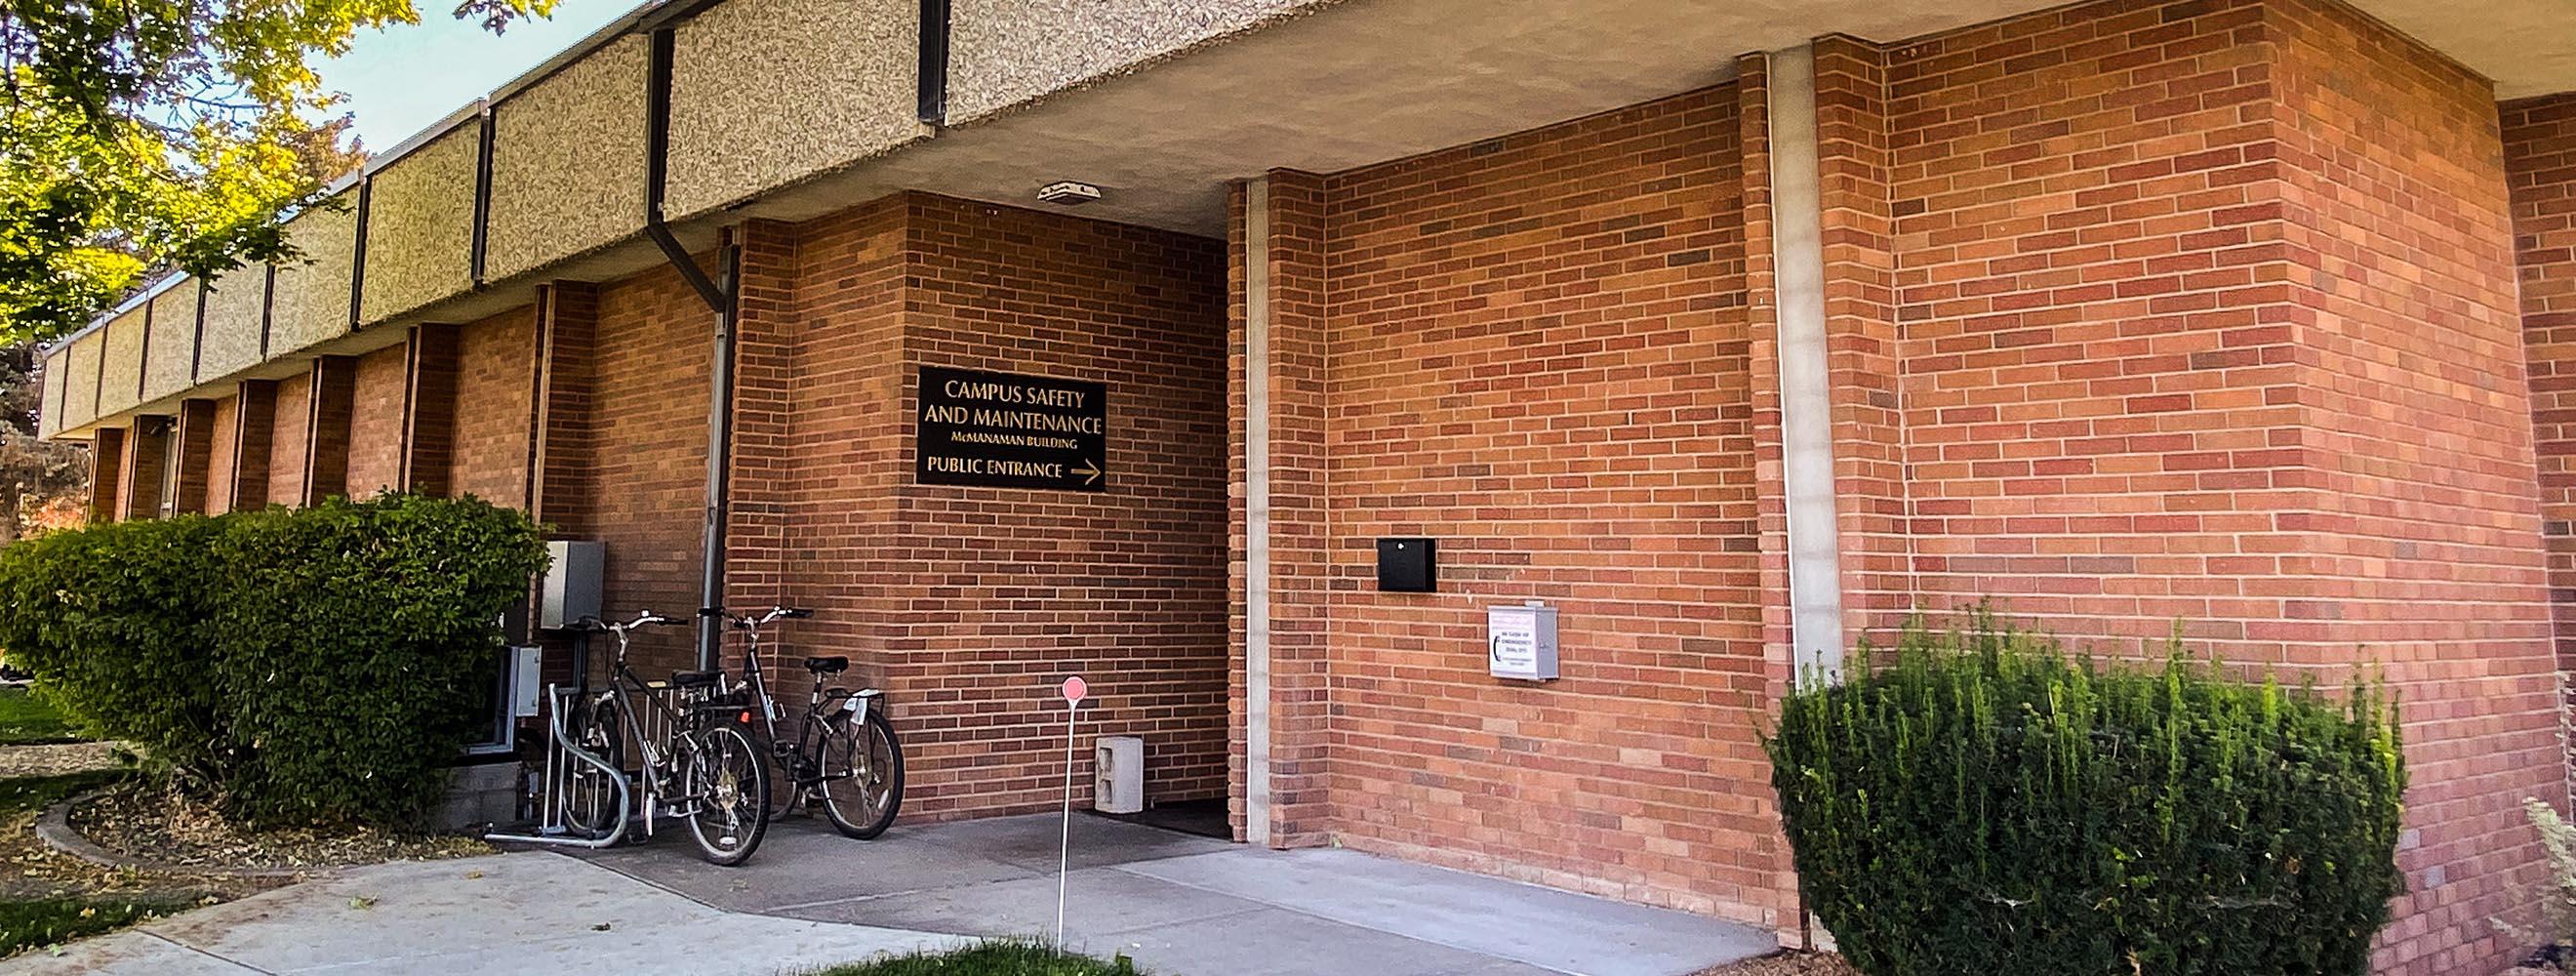 Campus Safety Building with large sign next to entry way